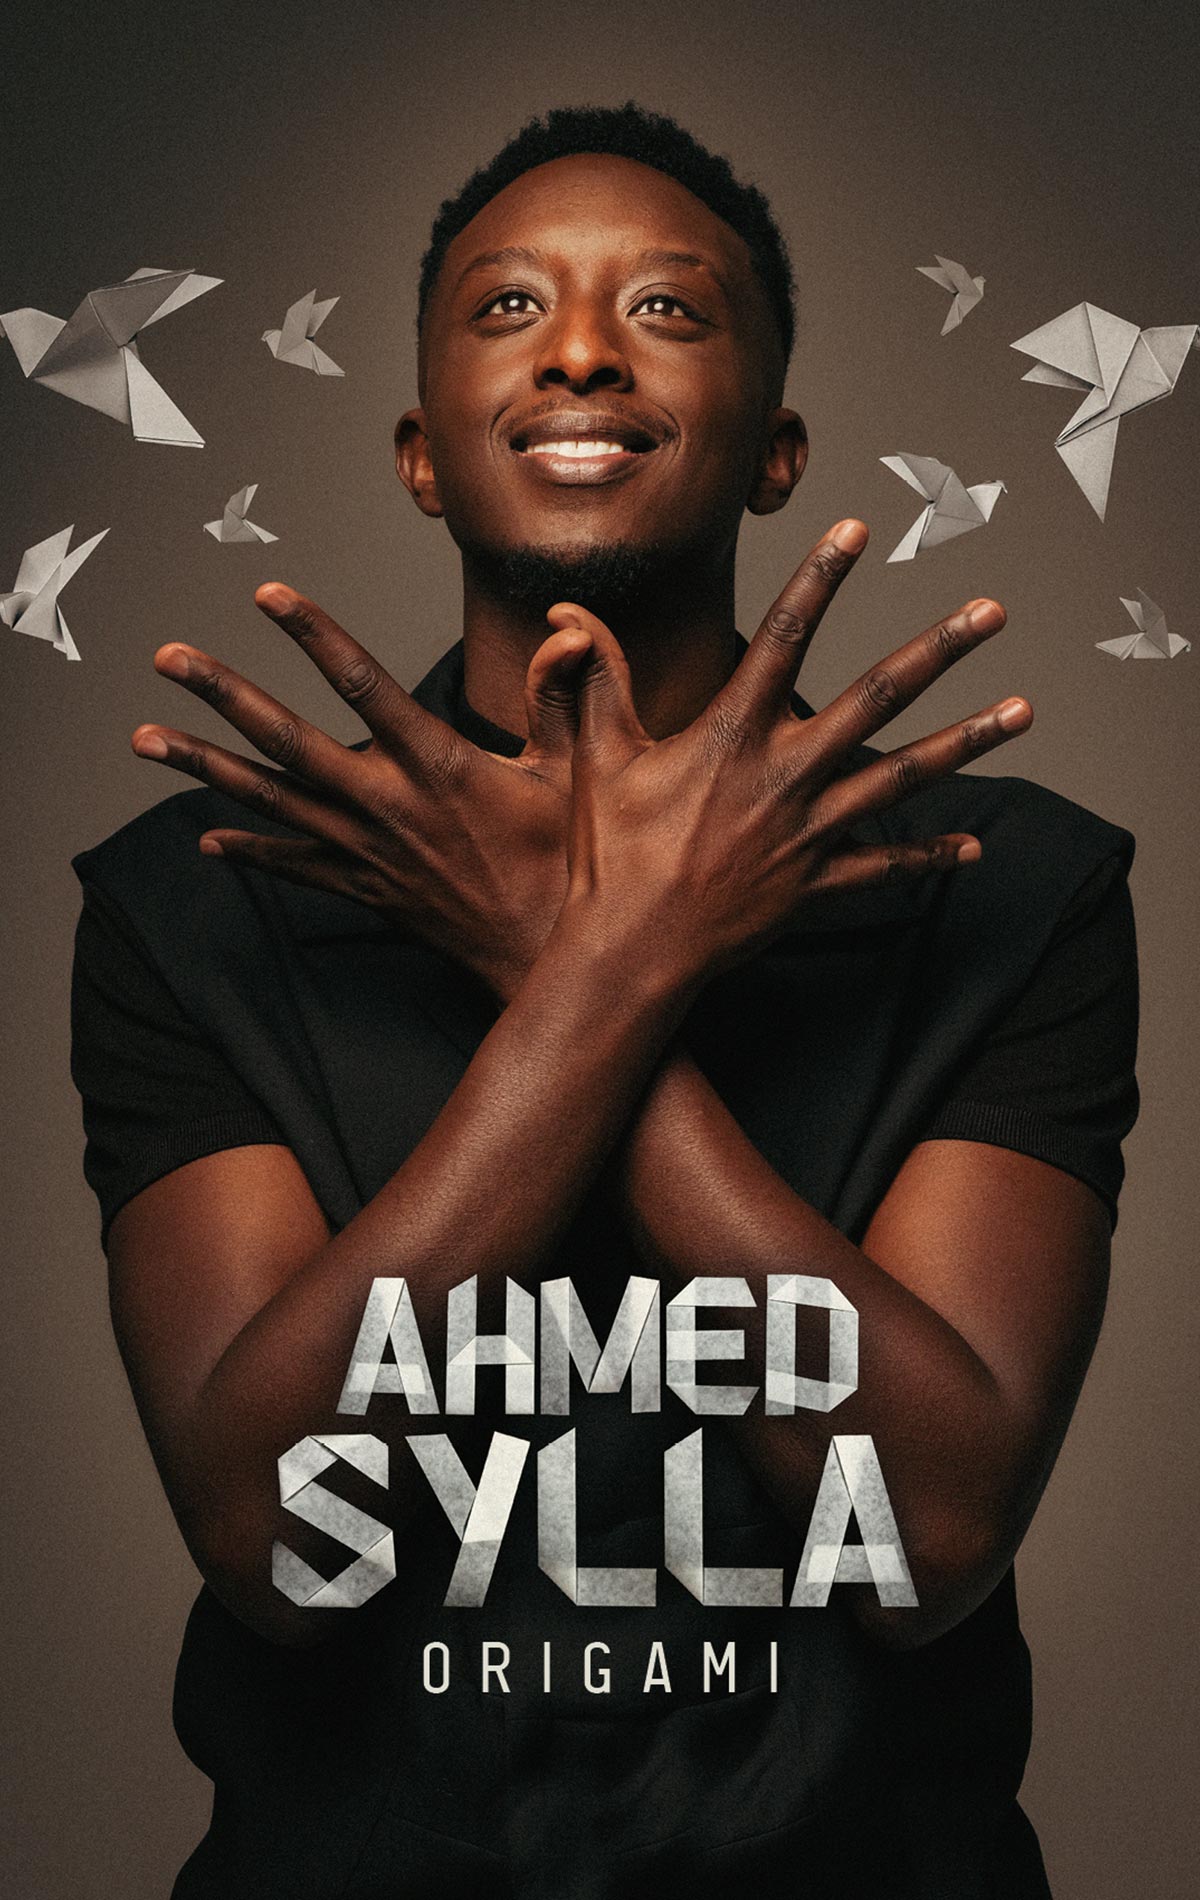 Ahmed Sylla - Origami at L'Acclameur Tickets